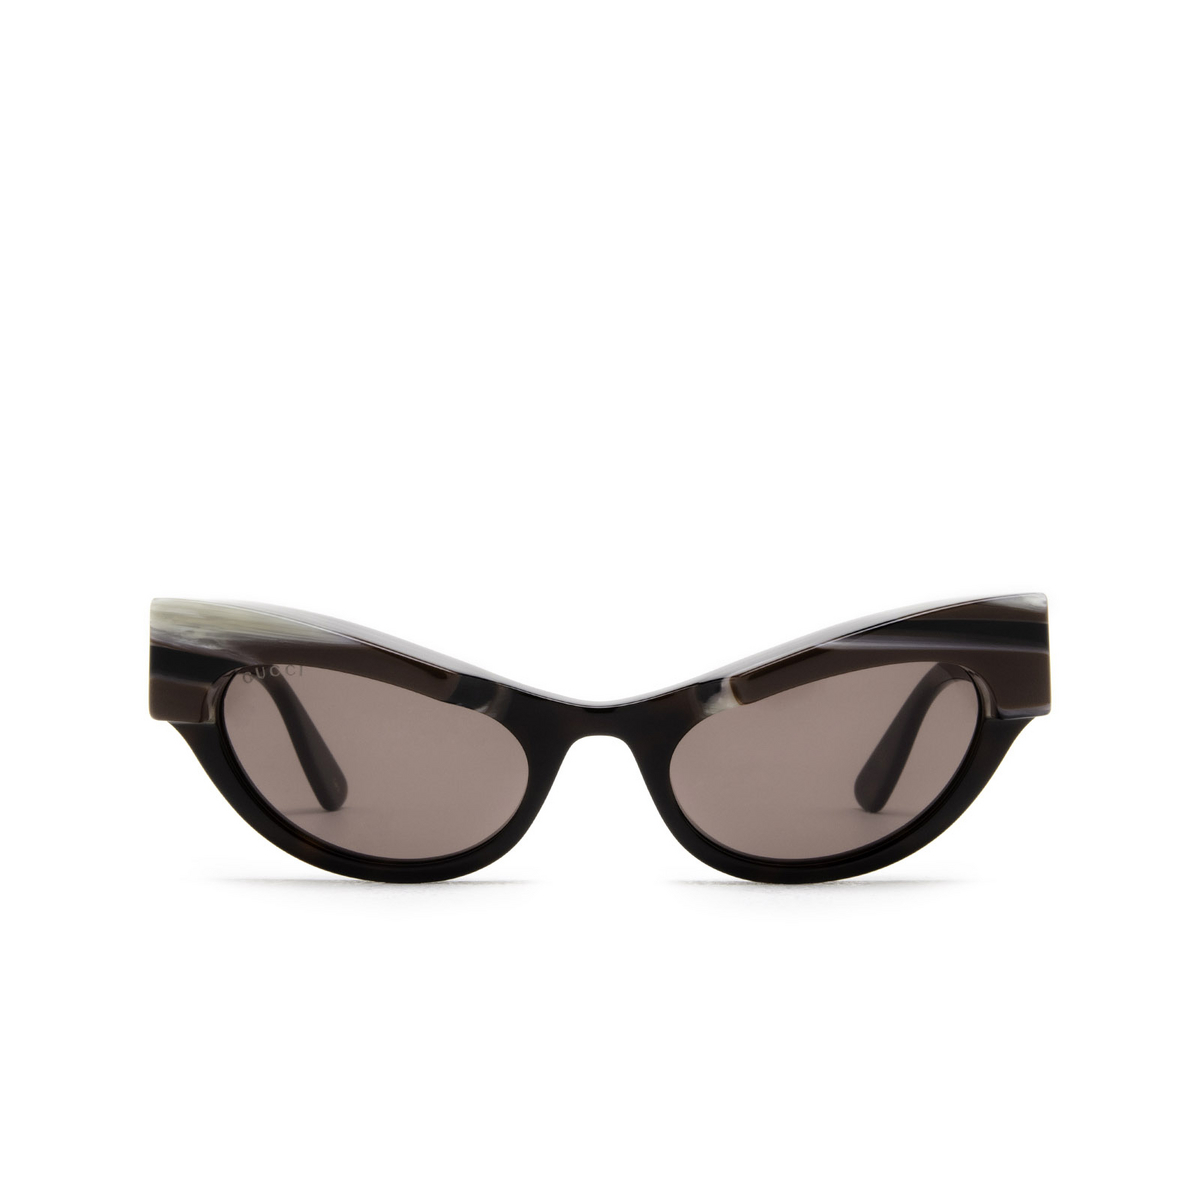 Gucci® Cat-eye Sunglasses: GG1167S color 002 Havana - front view